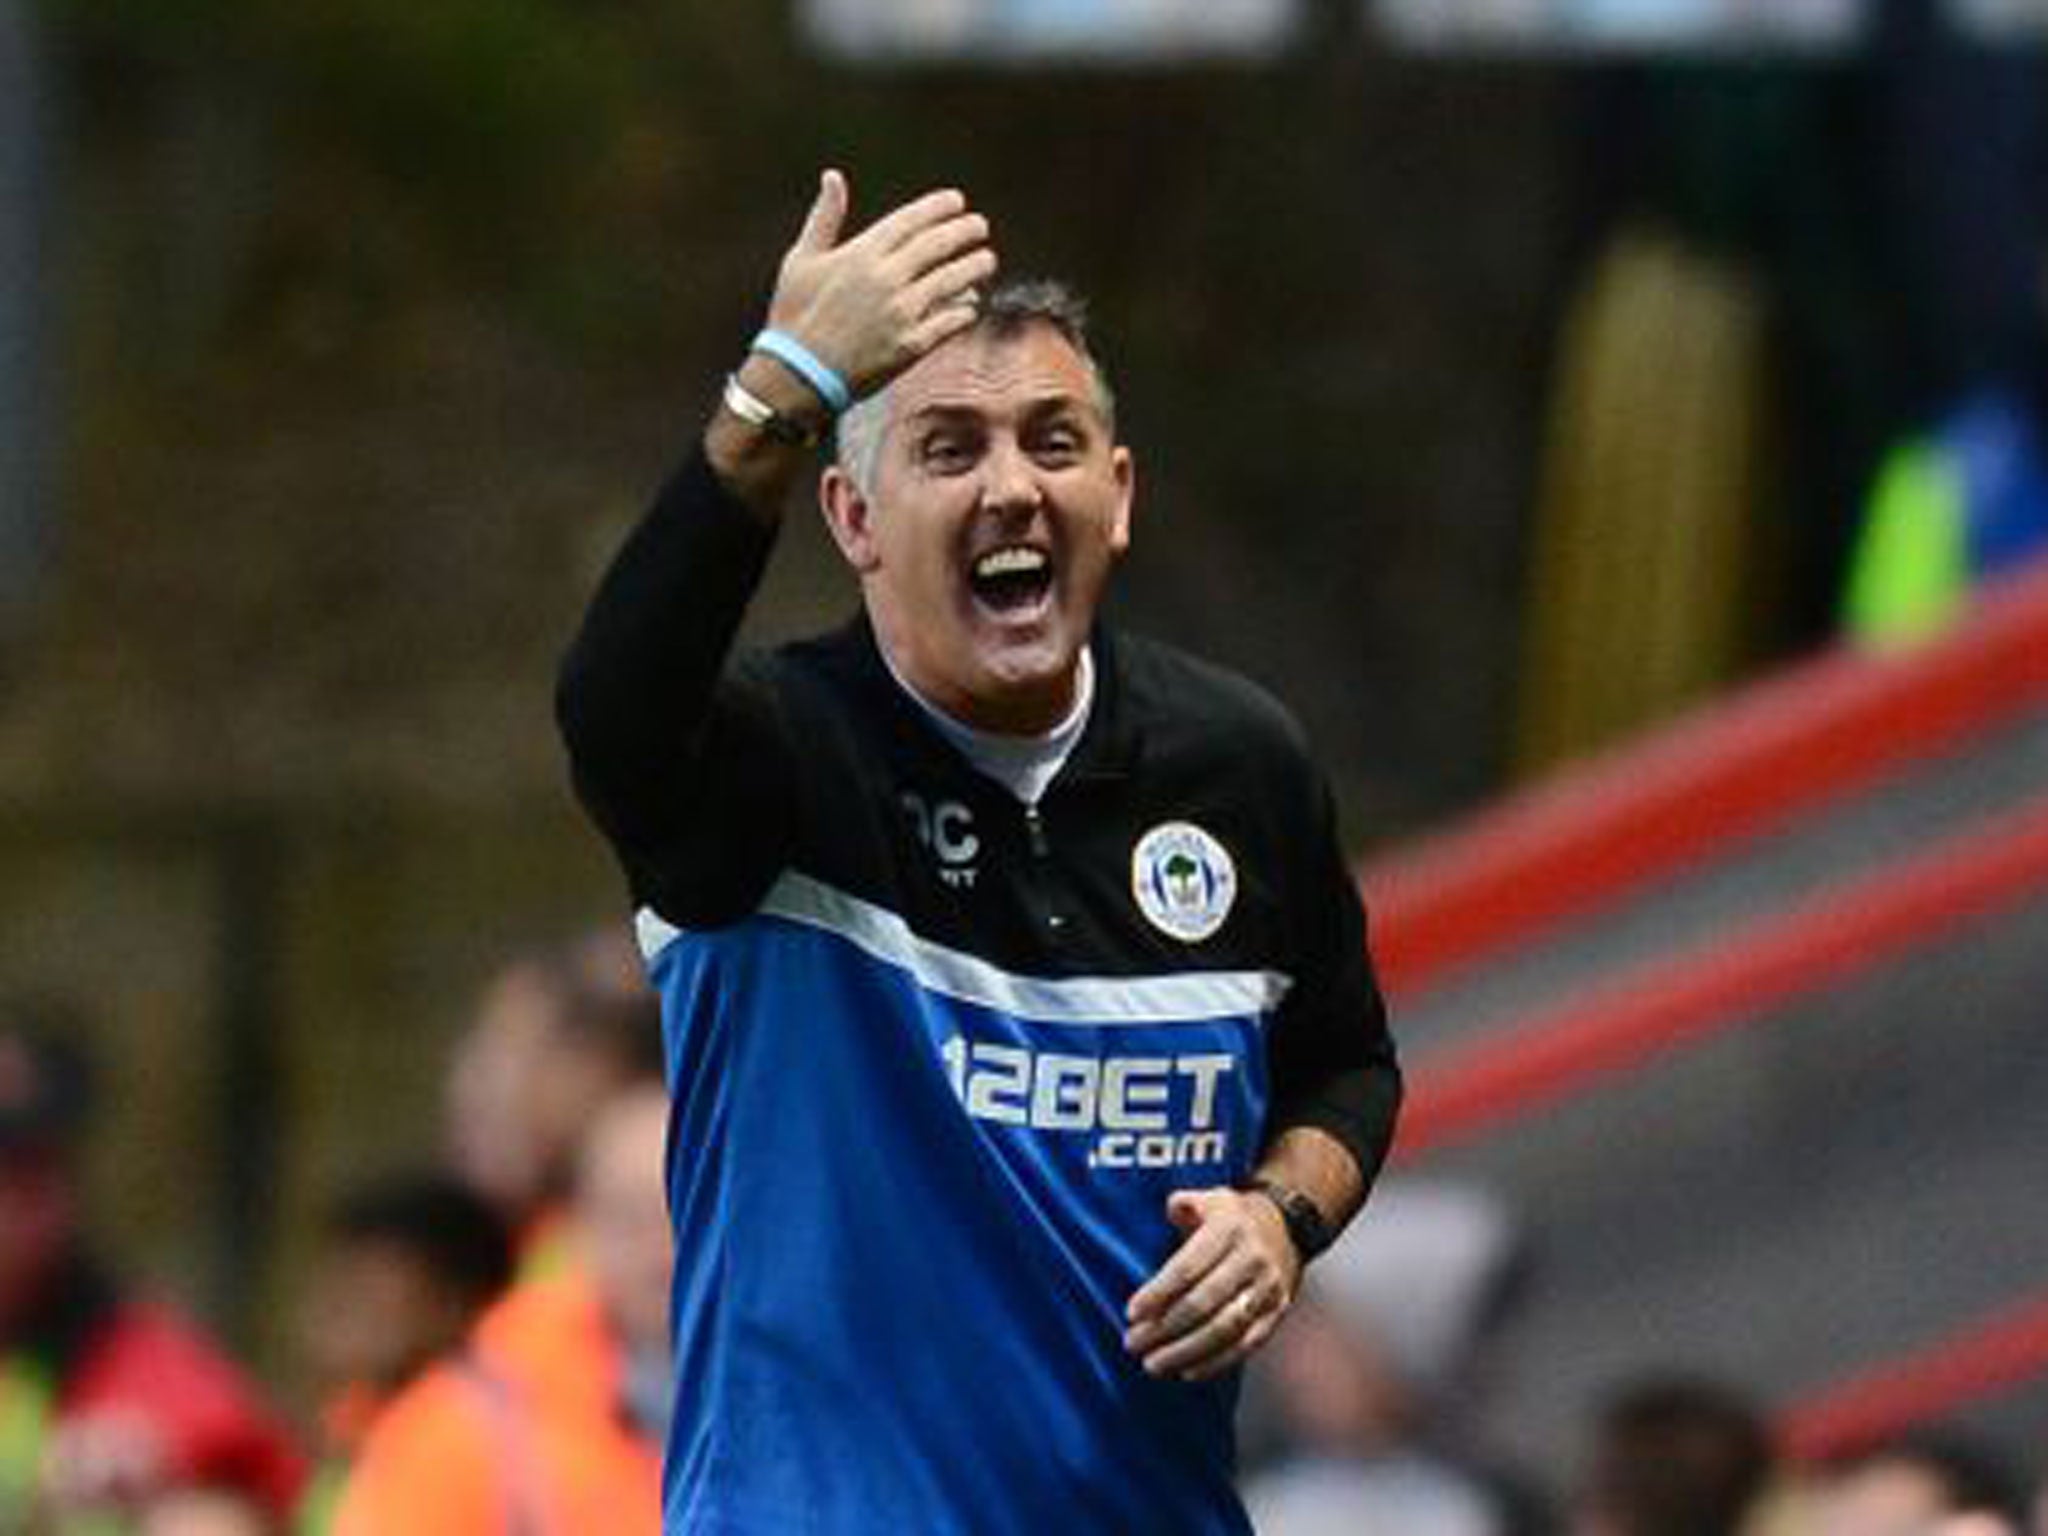 Wigan manager Owen Coyle makes a gesture from the touchline at The Valley